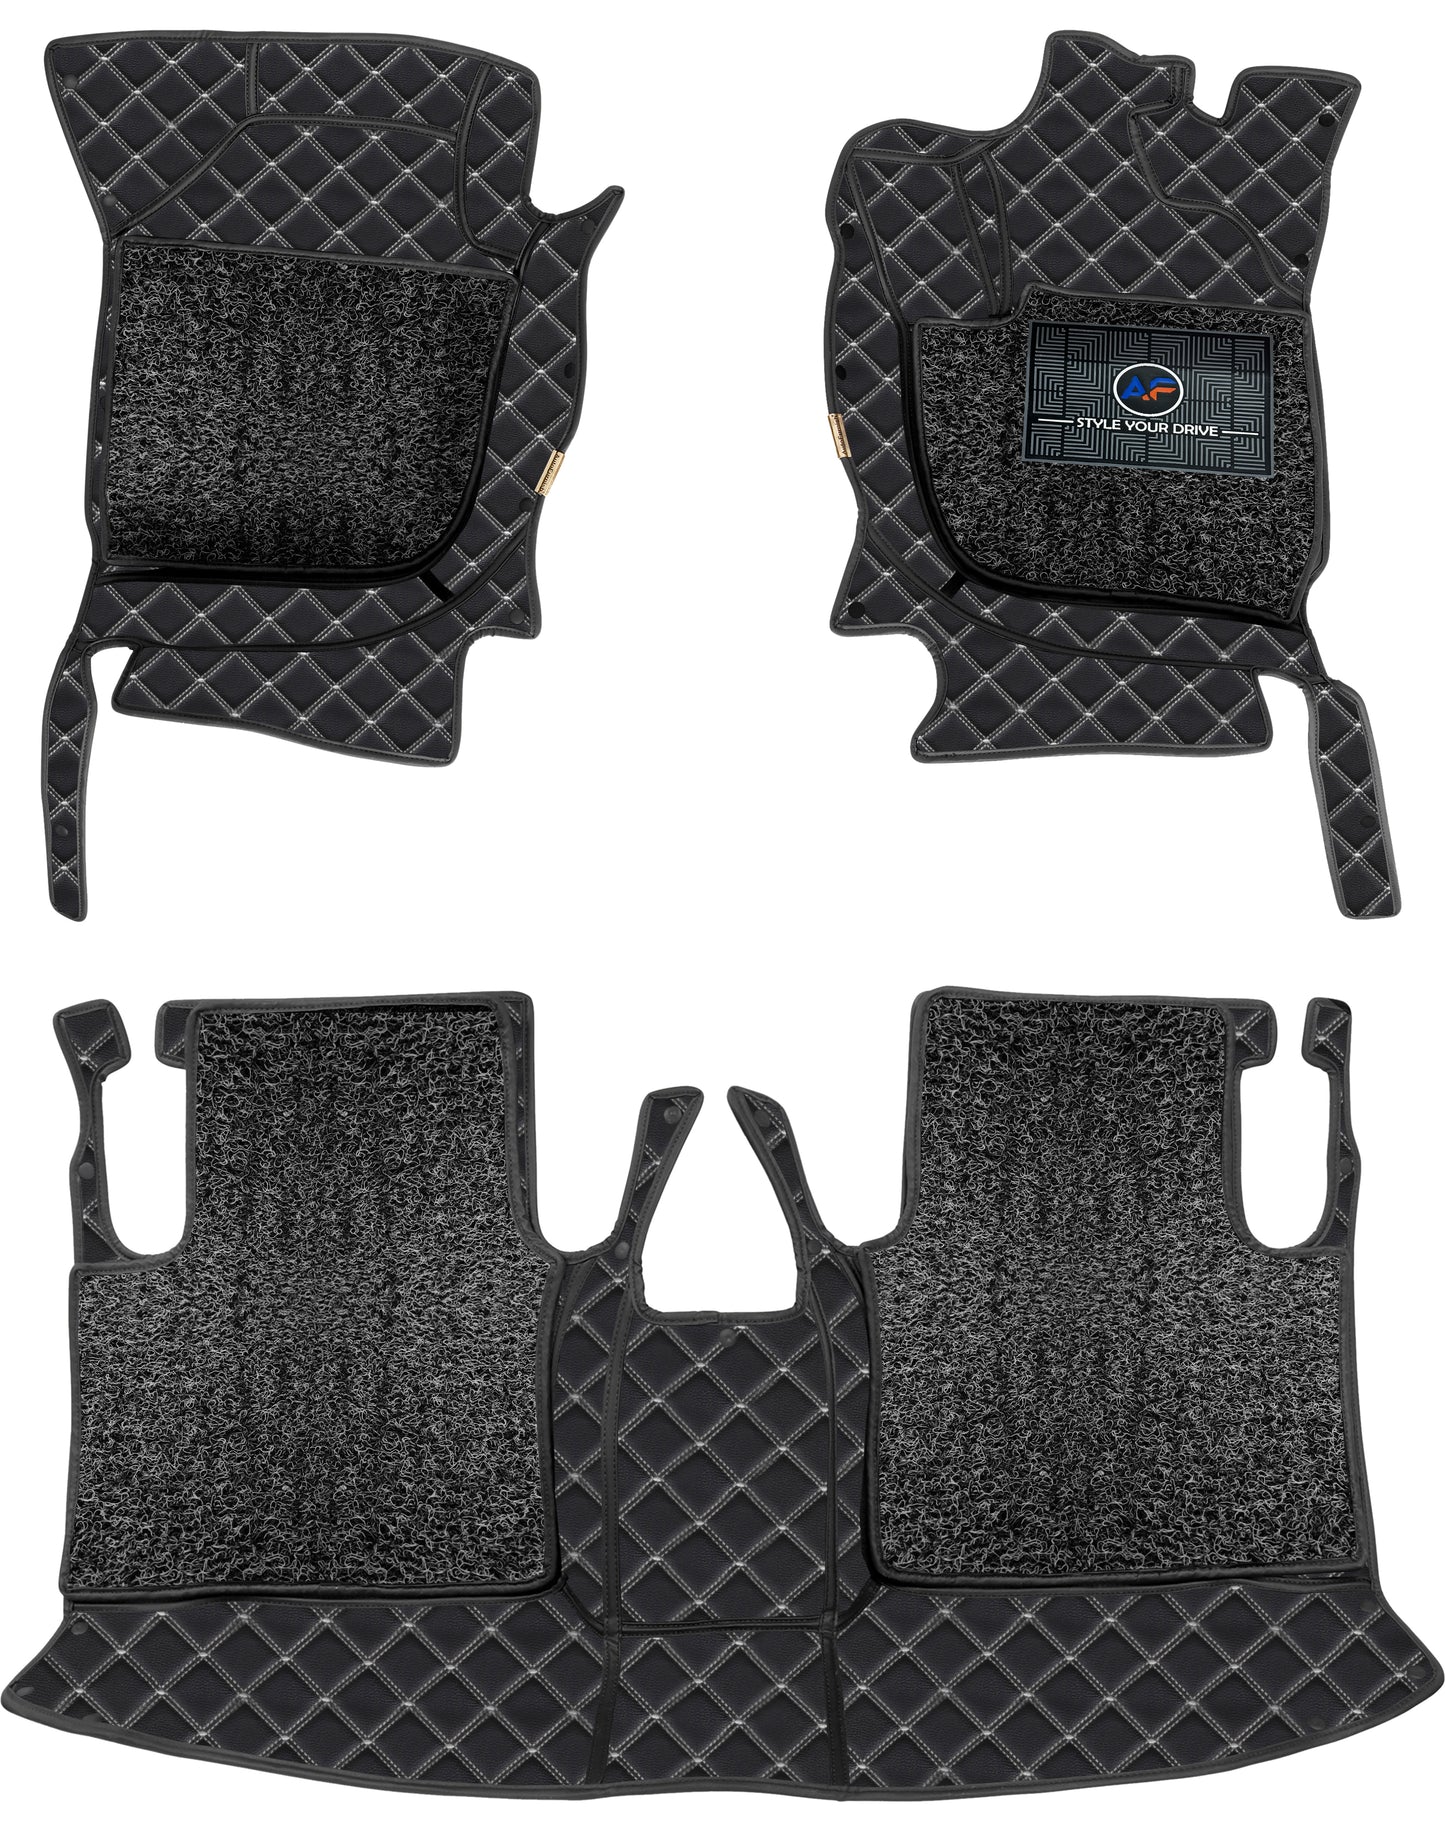 Land Rover Freelander 2 2013 7D Luxury Car Mat, All Weather Proof, Anti-Skid, 100% Waterproof & Odorless with Unique Diamond Fish Design (24mm Luxury PU Leather, 2 Rows)